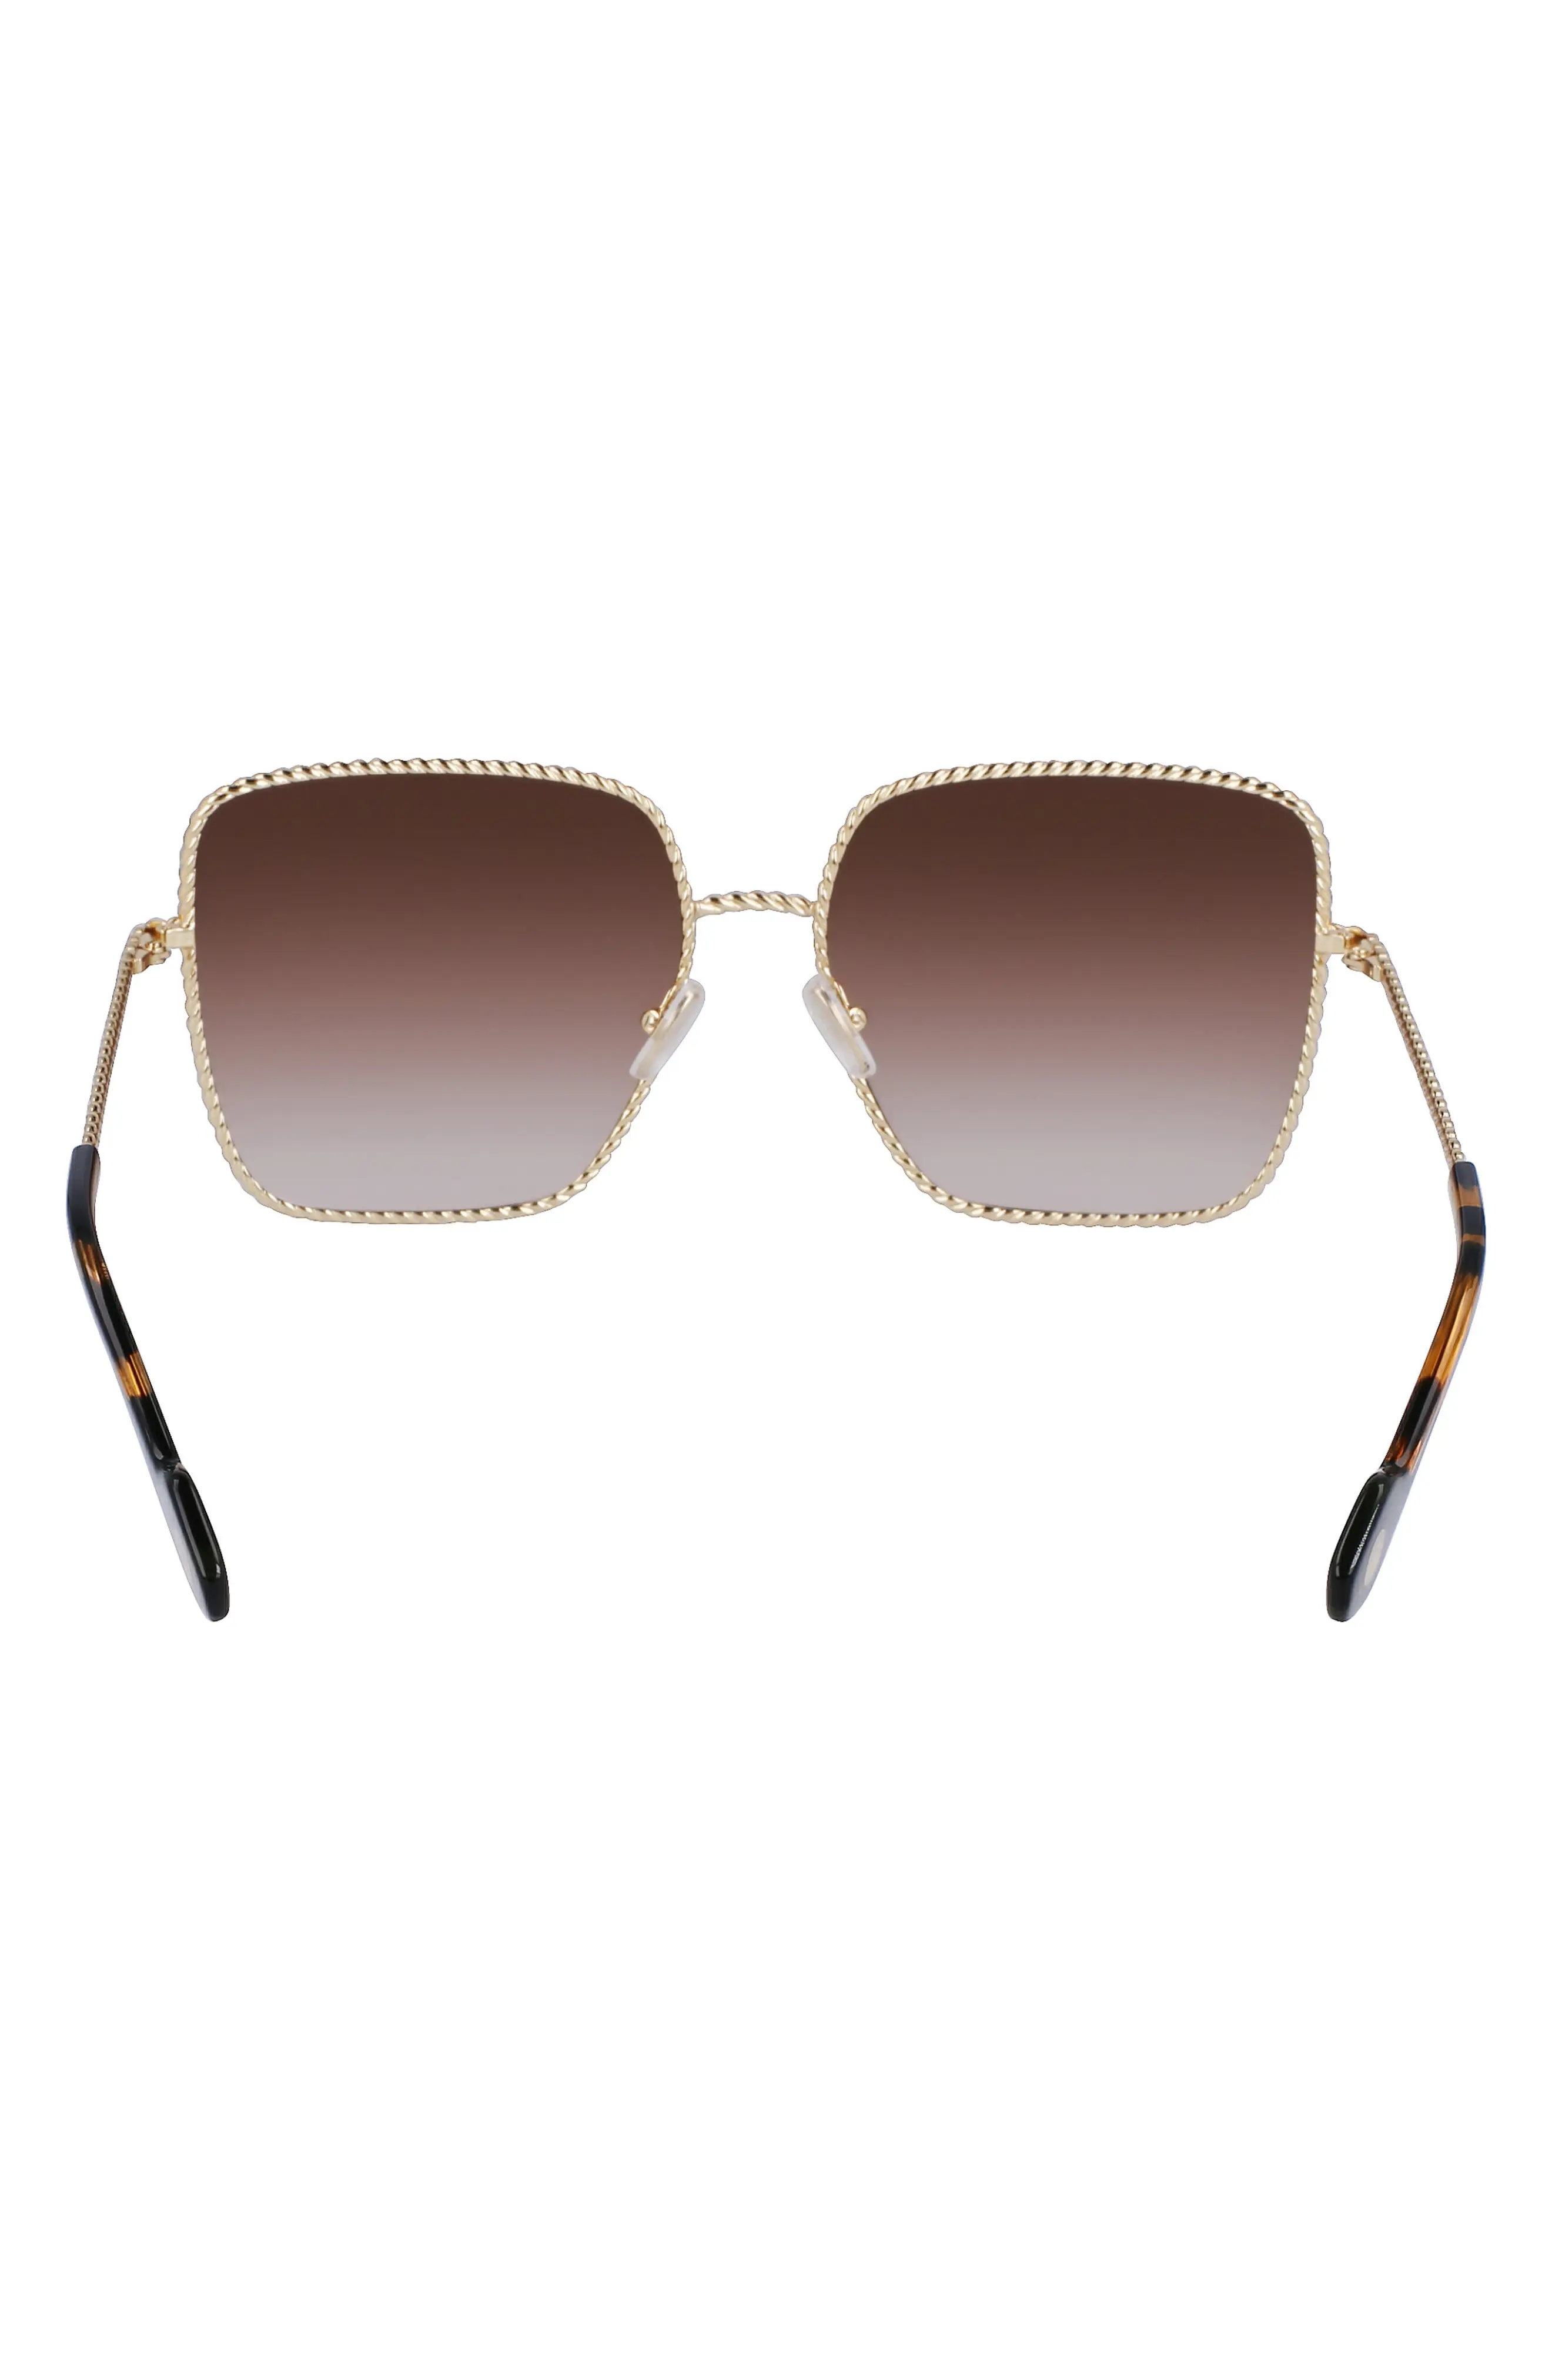 Babe 59mm Gradient Square Sunglasses in Gold/Gradient Brown - 4